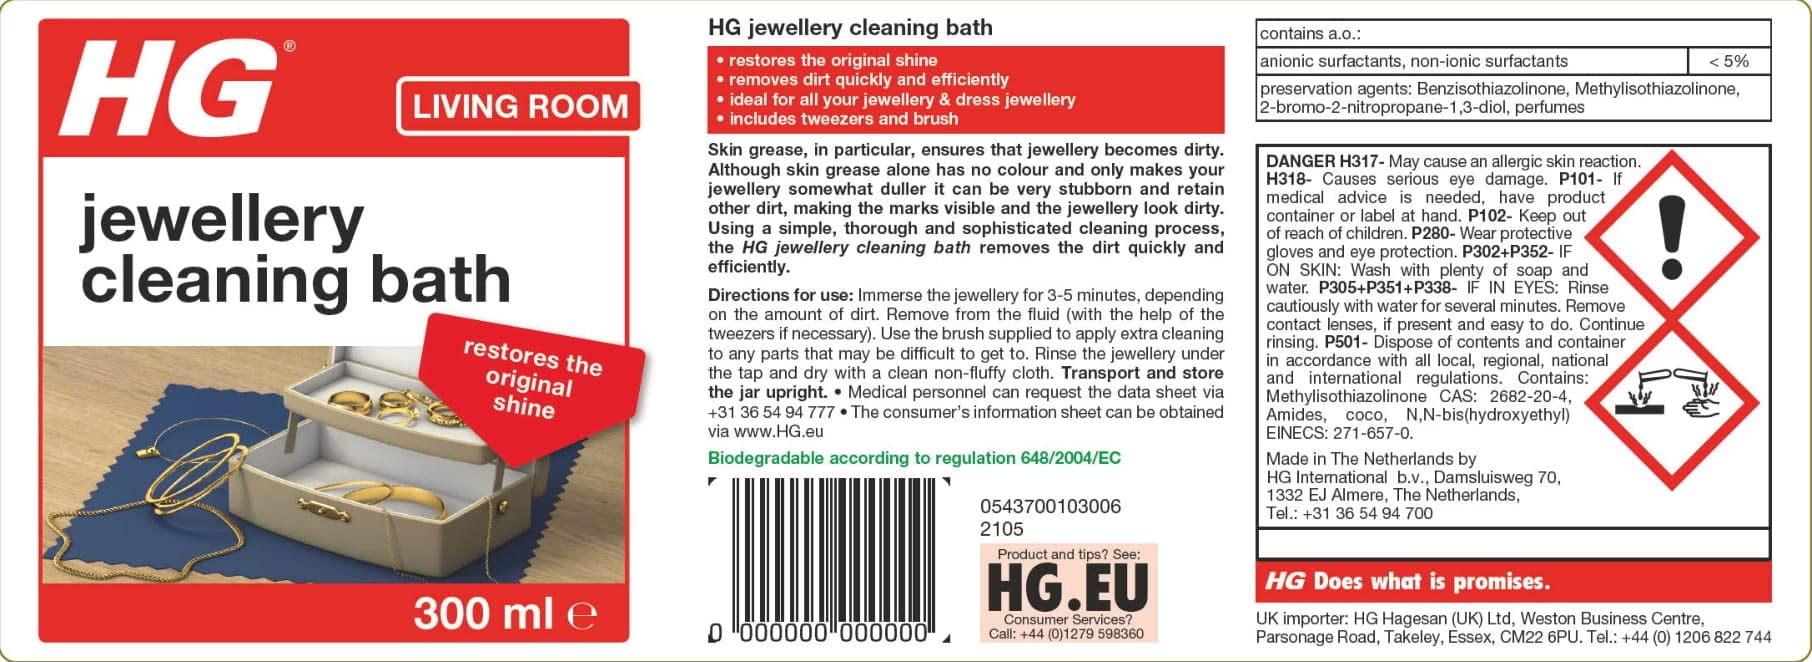 HG Jewellery Cleaning Bath, For Gold & Silver Fine Dress Jewellery, Gentle Easy To Use Cleaner Kit Restores Shine & Sparkle - 300ml (437030106)